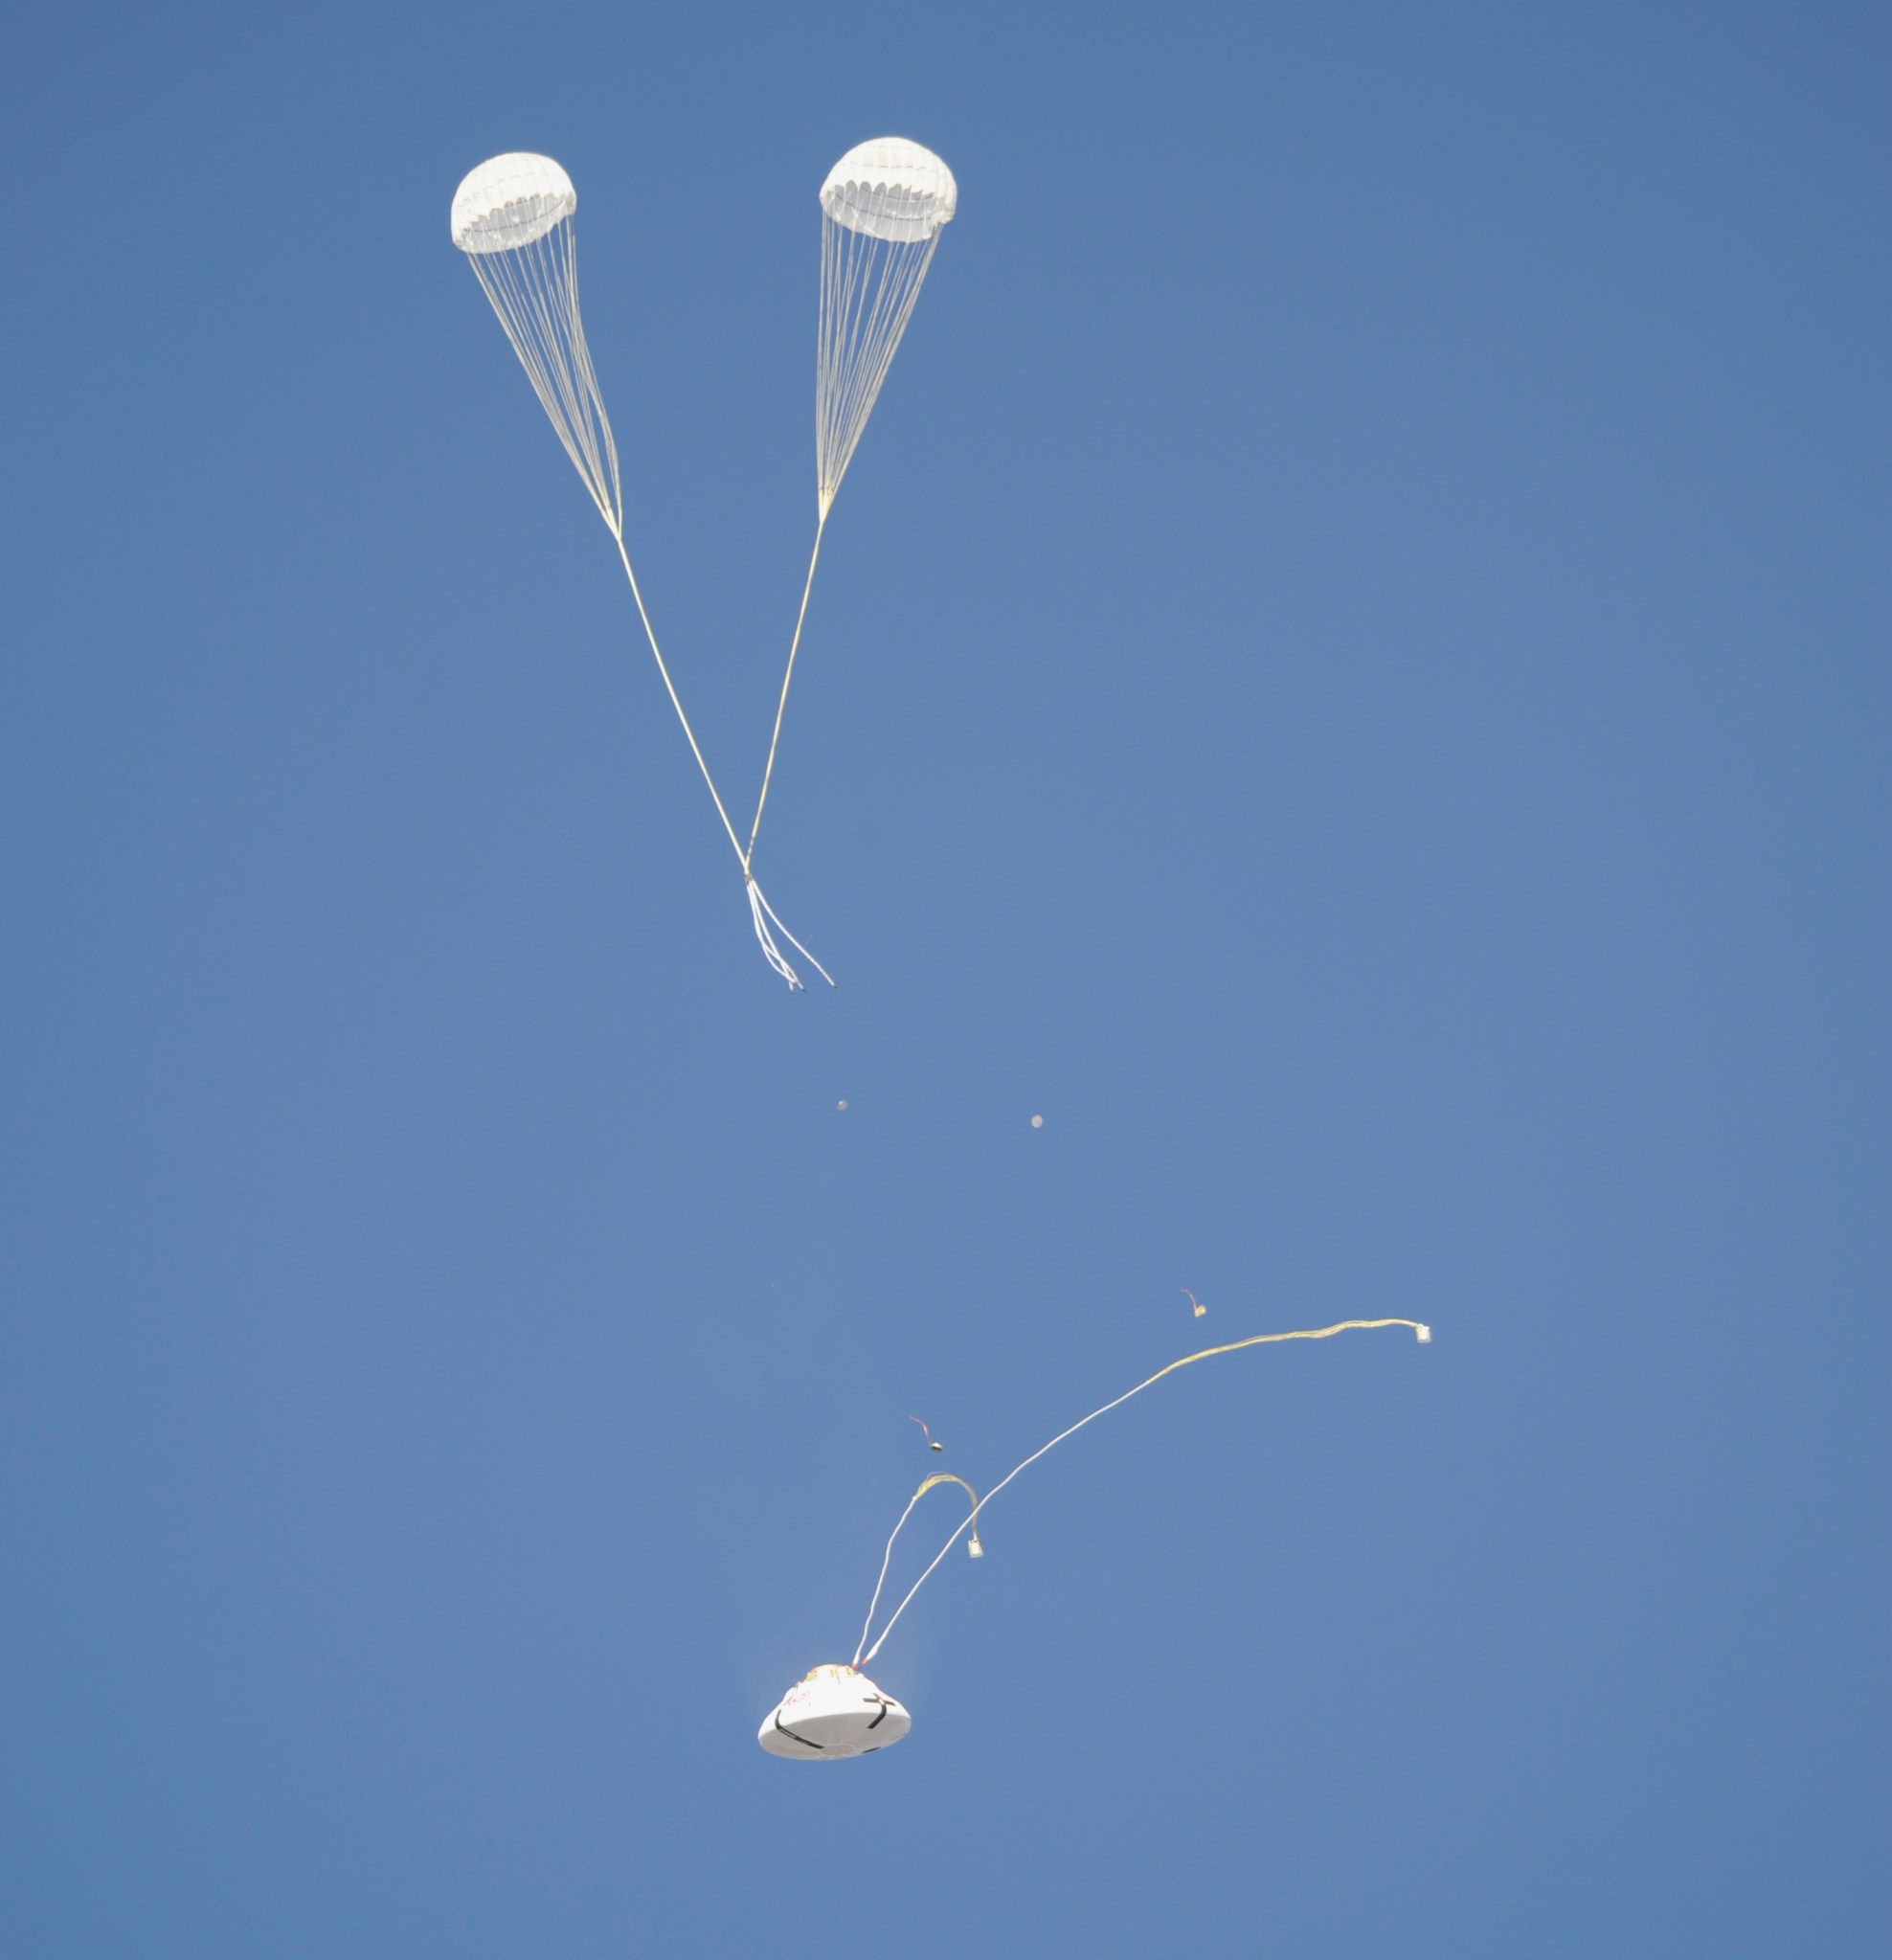 The Orion parachute system enters another phase of its descent from a C-17 aircraft.